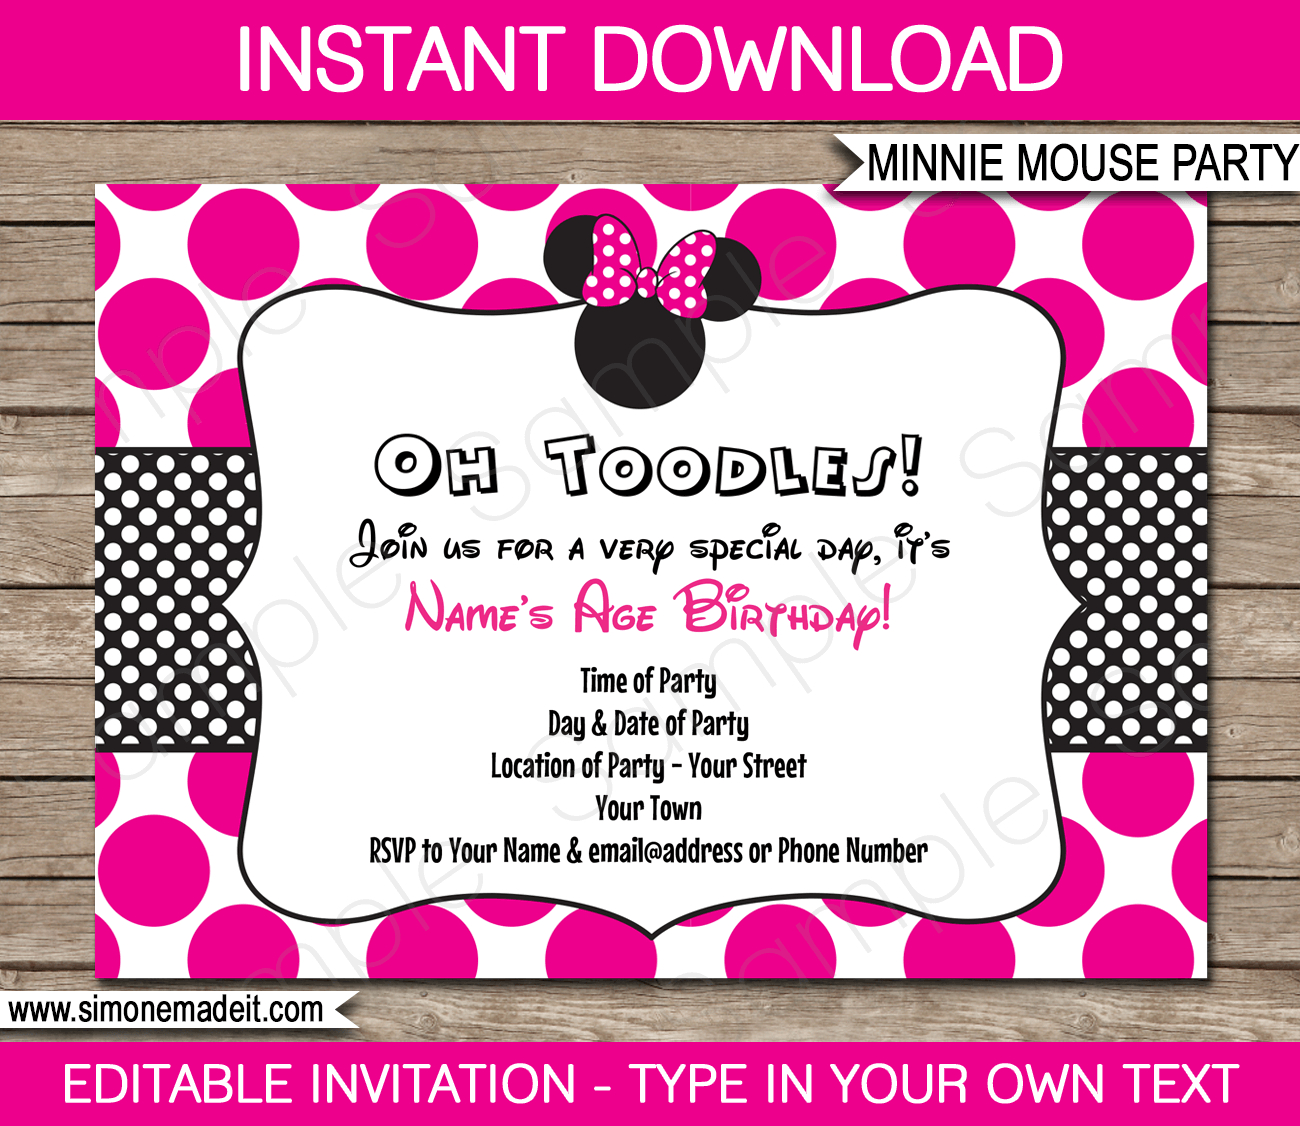 Minnie Mouse Party Invitations Template | Birthday Party - Printable Invitations Free No Download